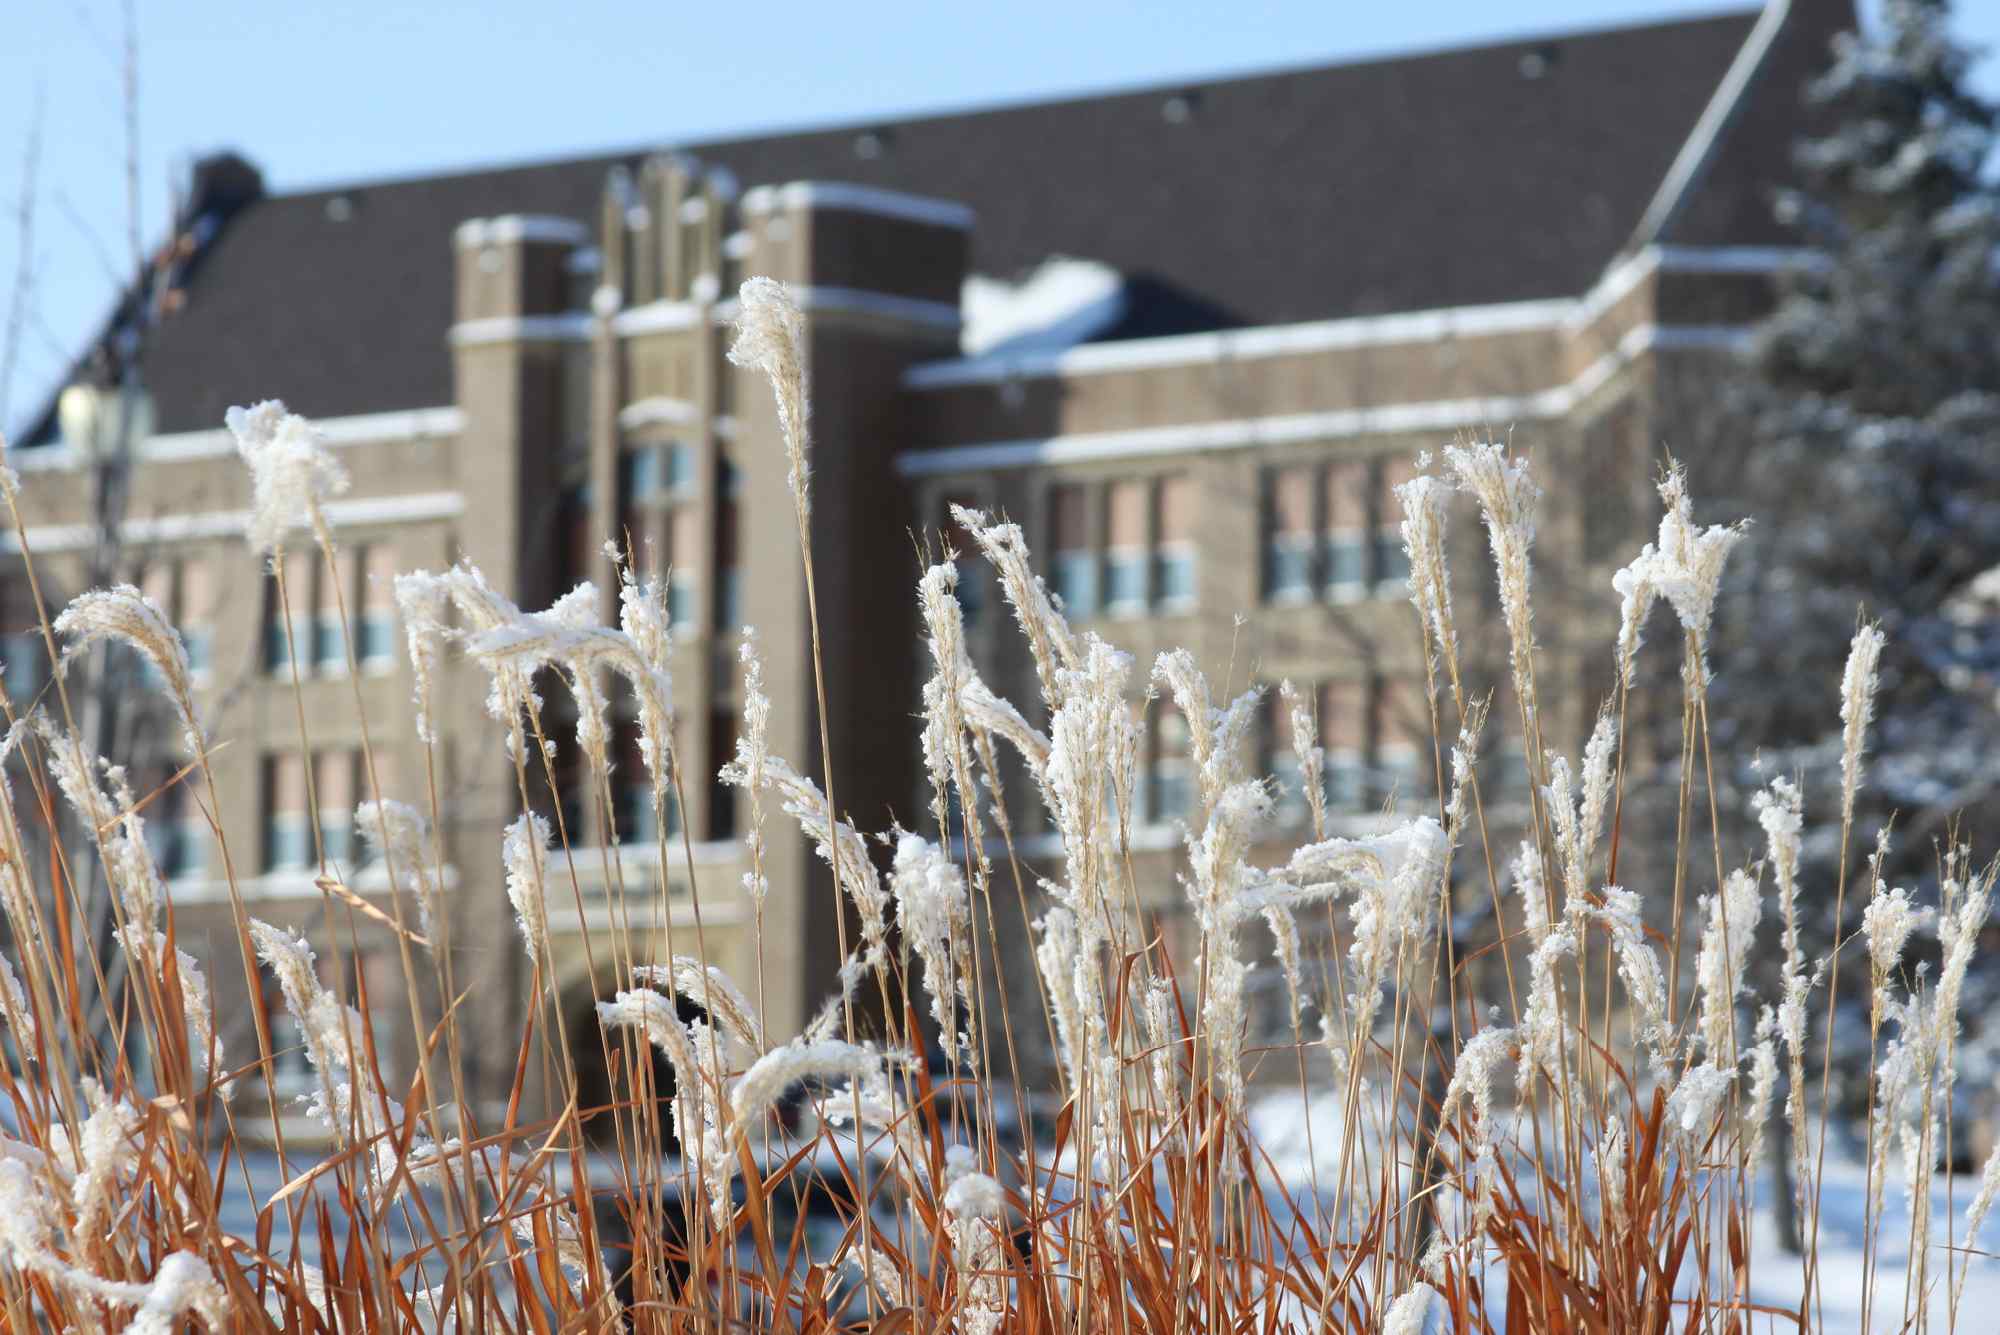 May Hall in the winter.